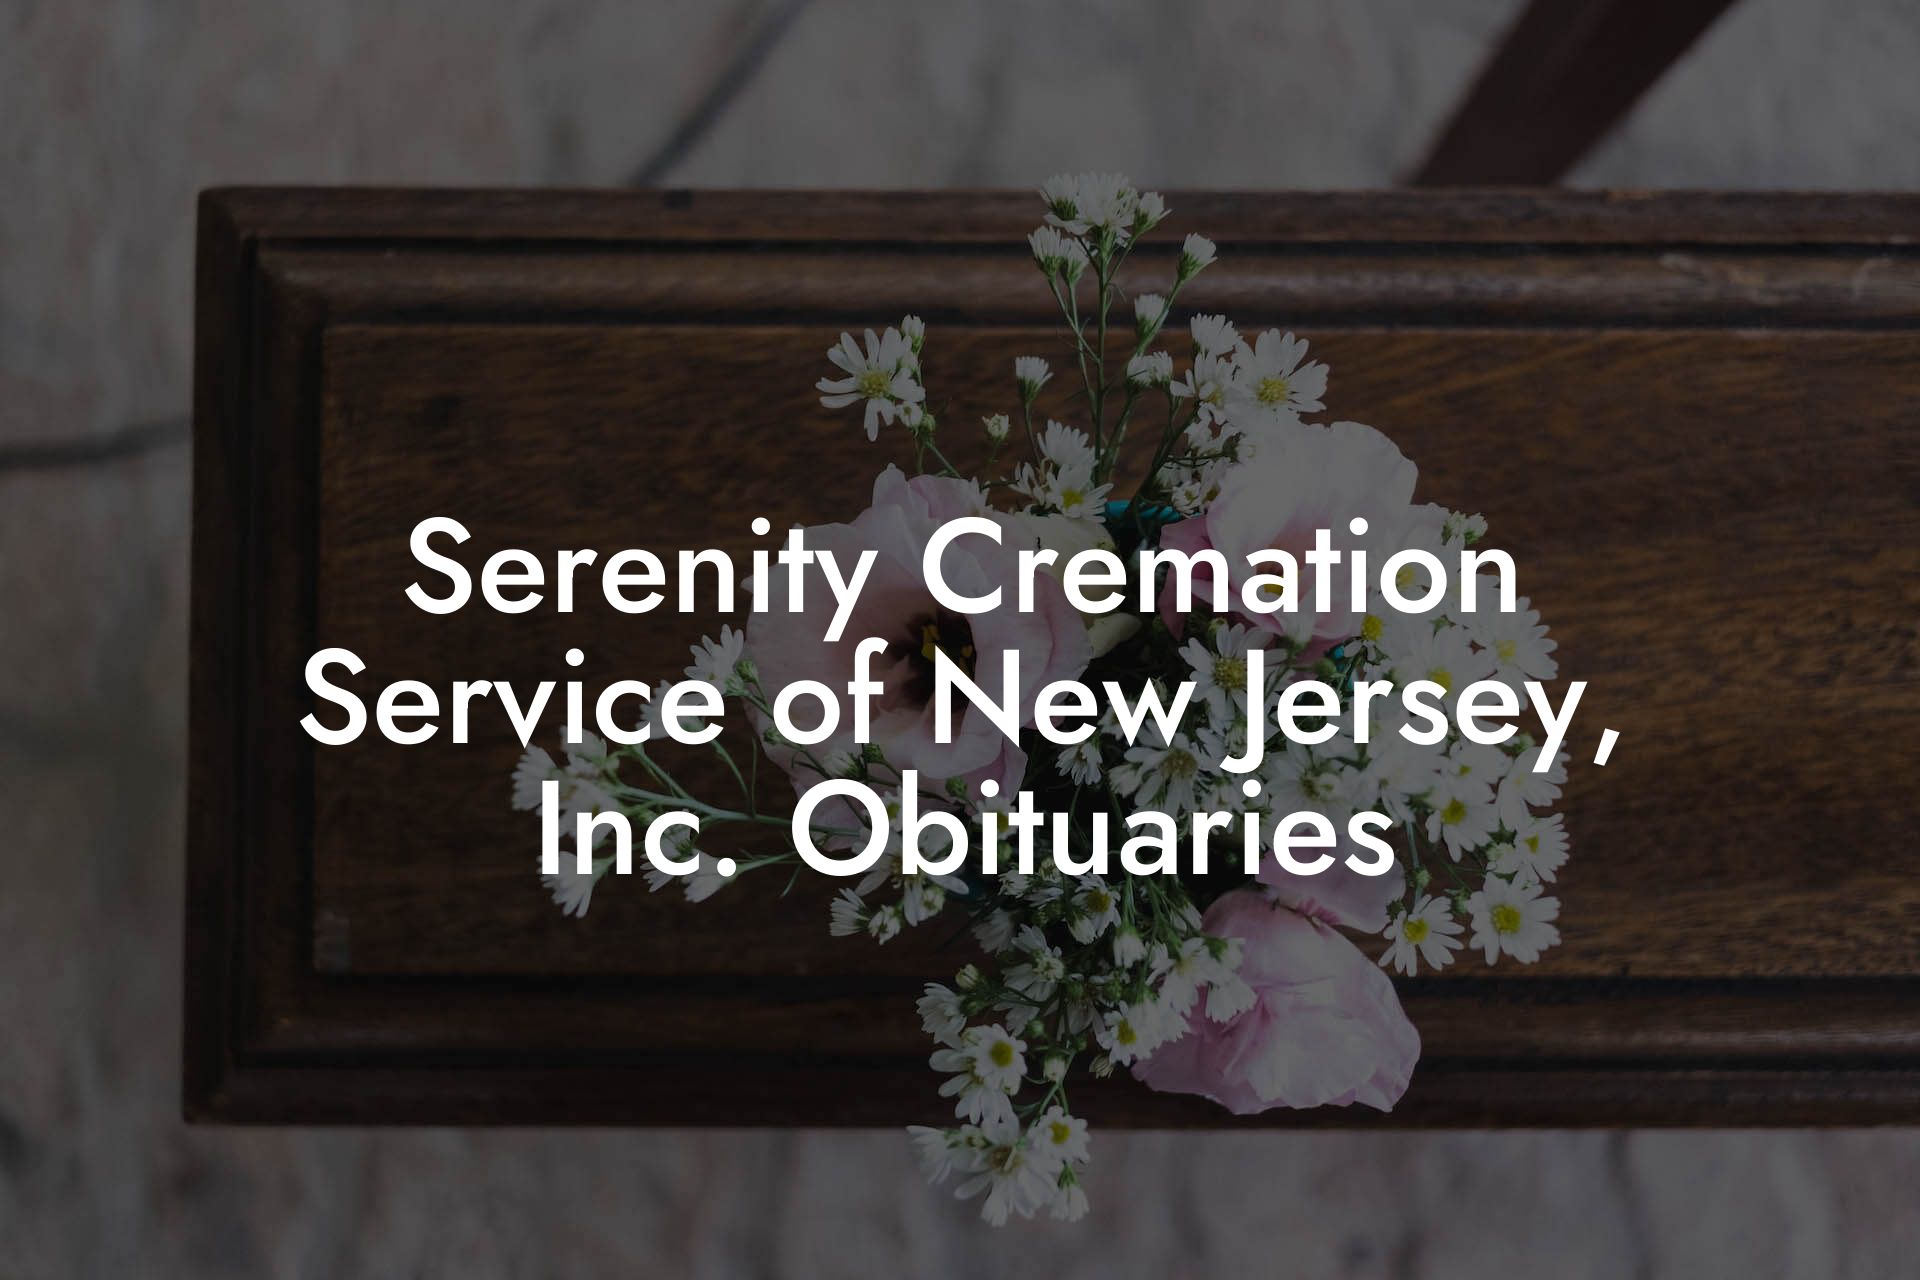 Serenity Cremation Service of New Jersey, Inc. Obituaries